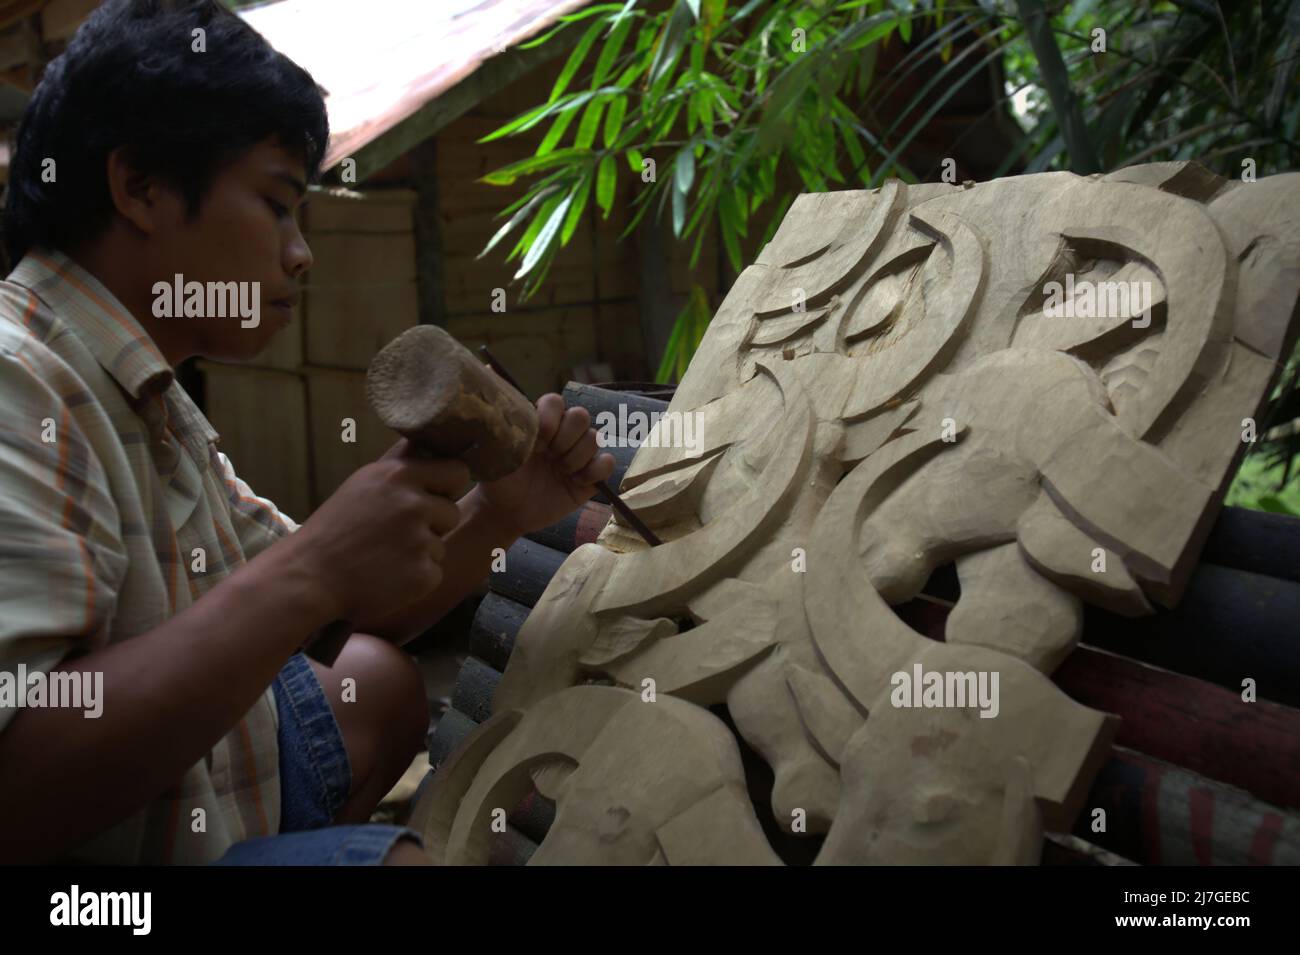 A man making wood carving in traditional village of Kete Kesu in North Toraja, South Sulawesi, Indonesia. Stock Photo